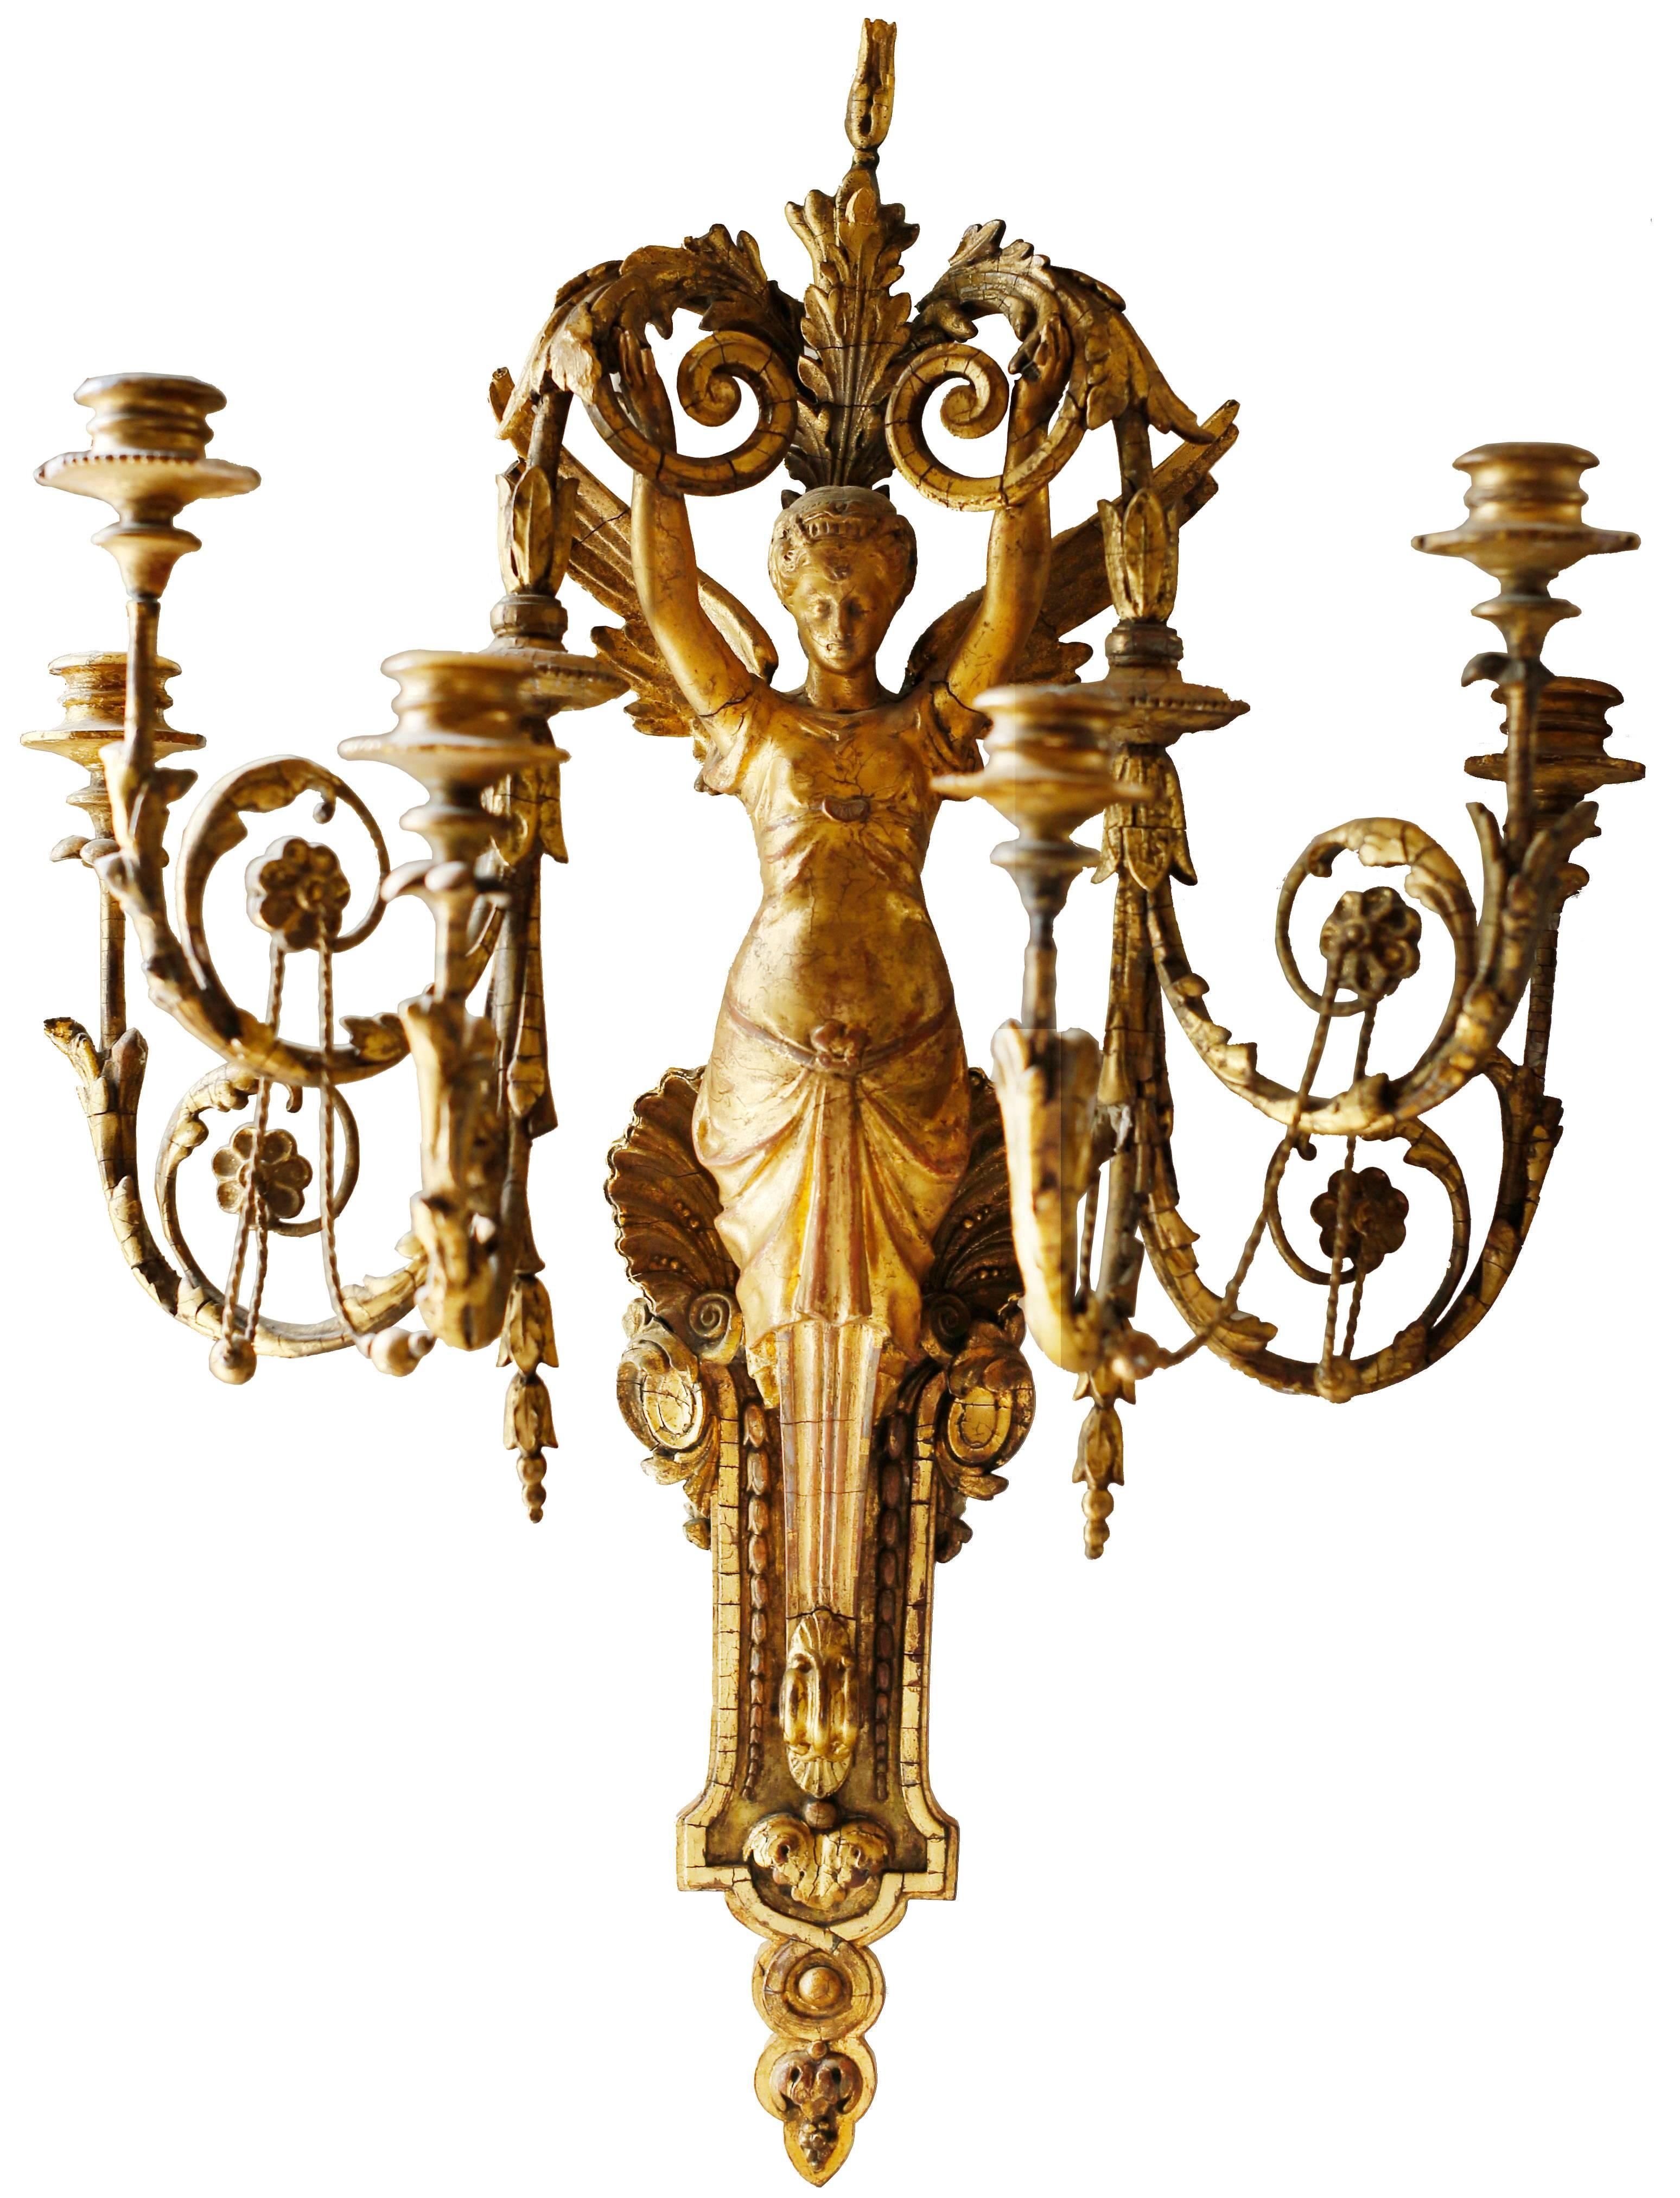 An exquisite pair of giltwood 6-light wall sconces. The light is supported by the figure of a winged seraphim whose draped lower half melds into a moulded bracket and acanthus pendant. The upper half of the bracket is decorated with a large scallop